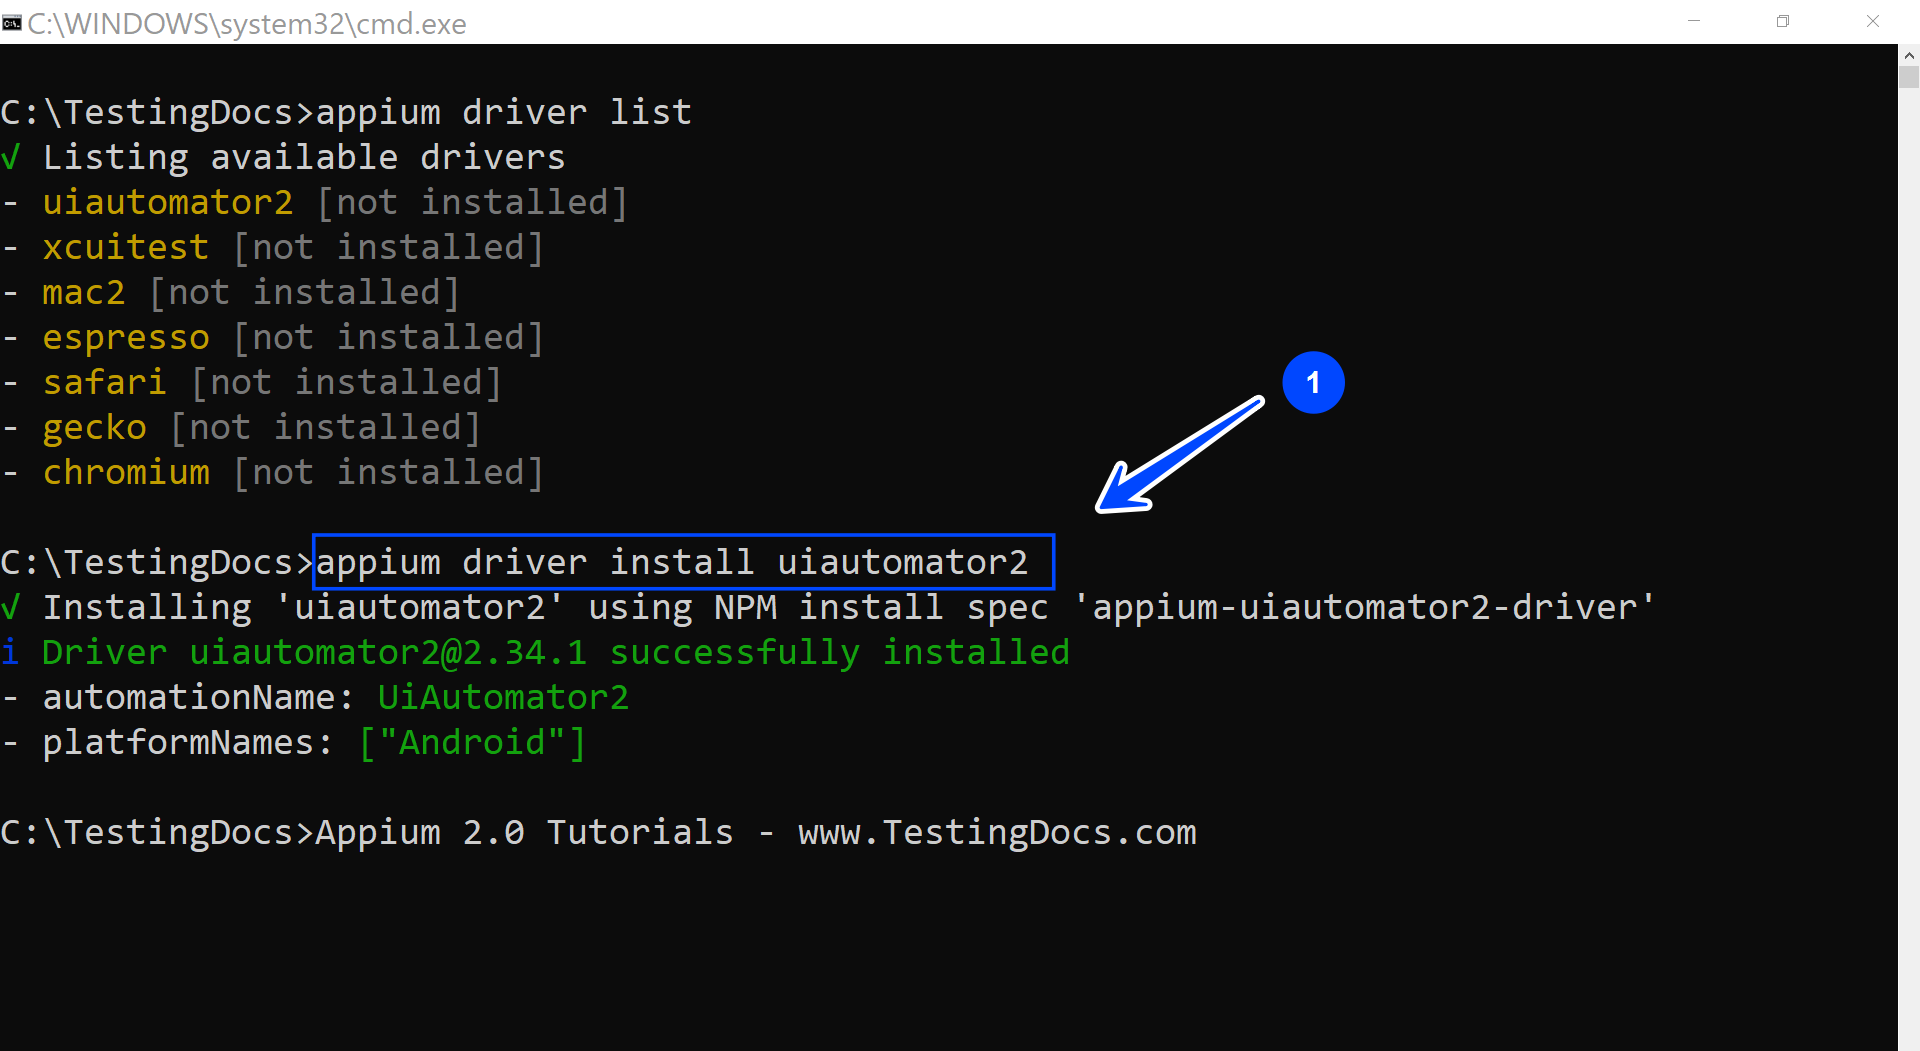 Appium 2.0 Android Driver Install